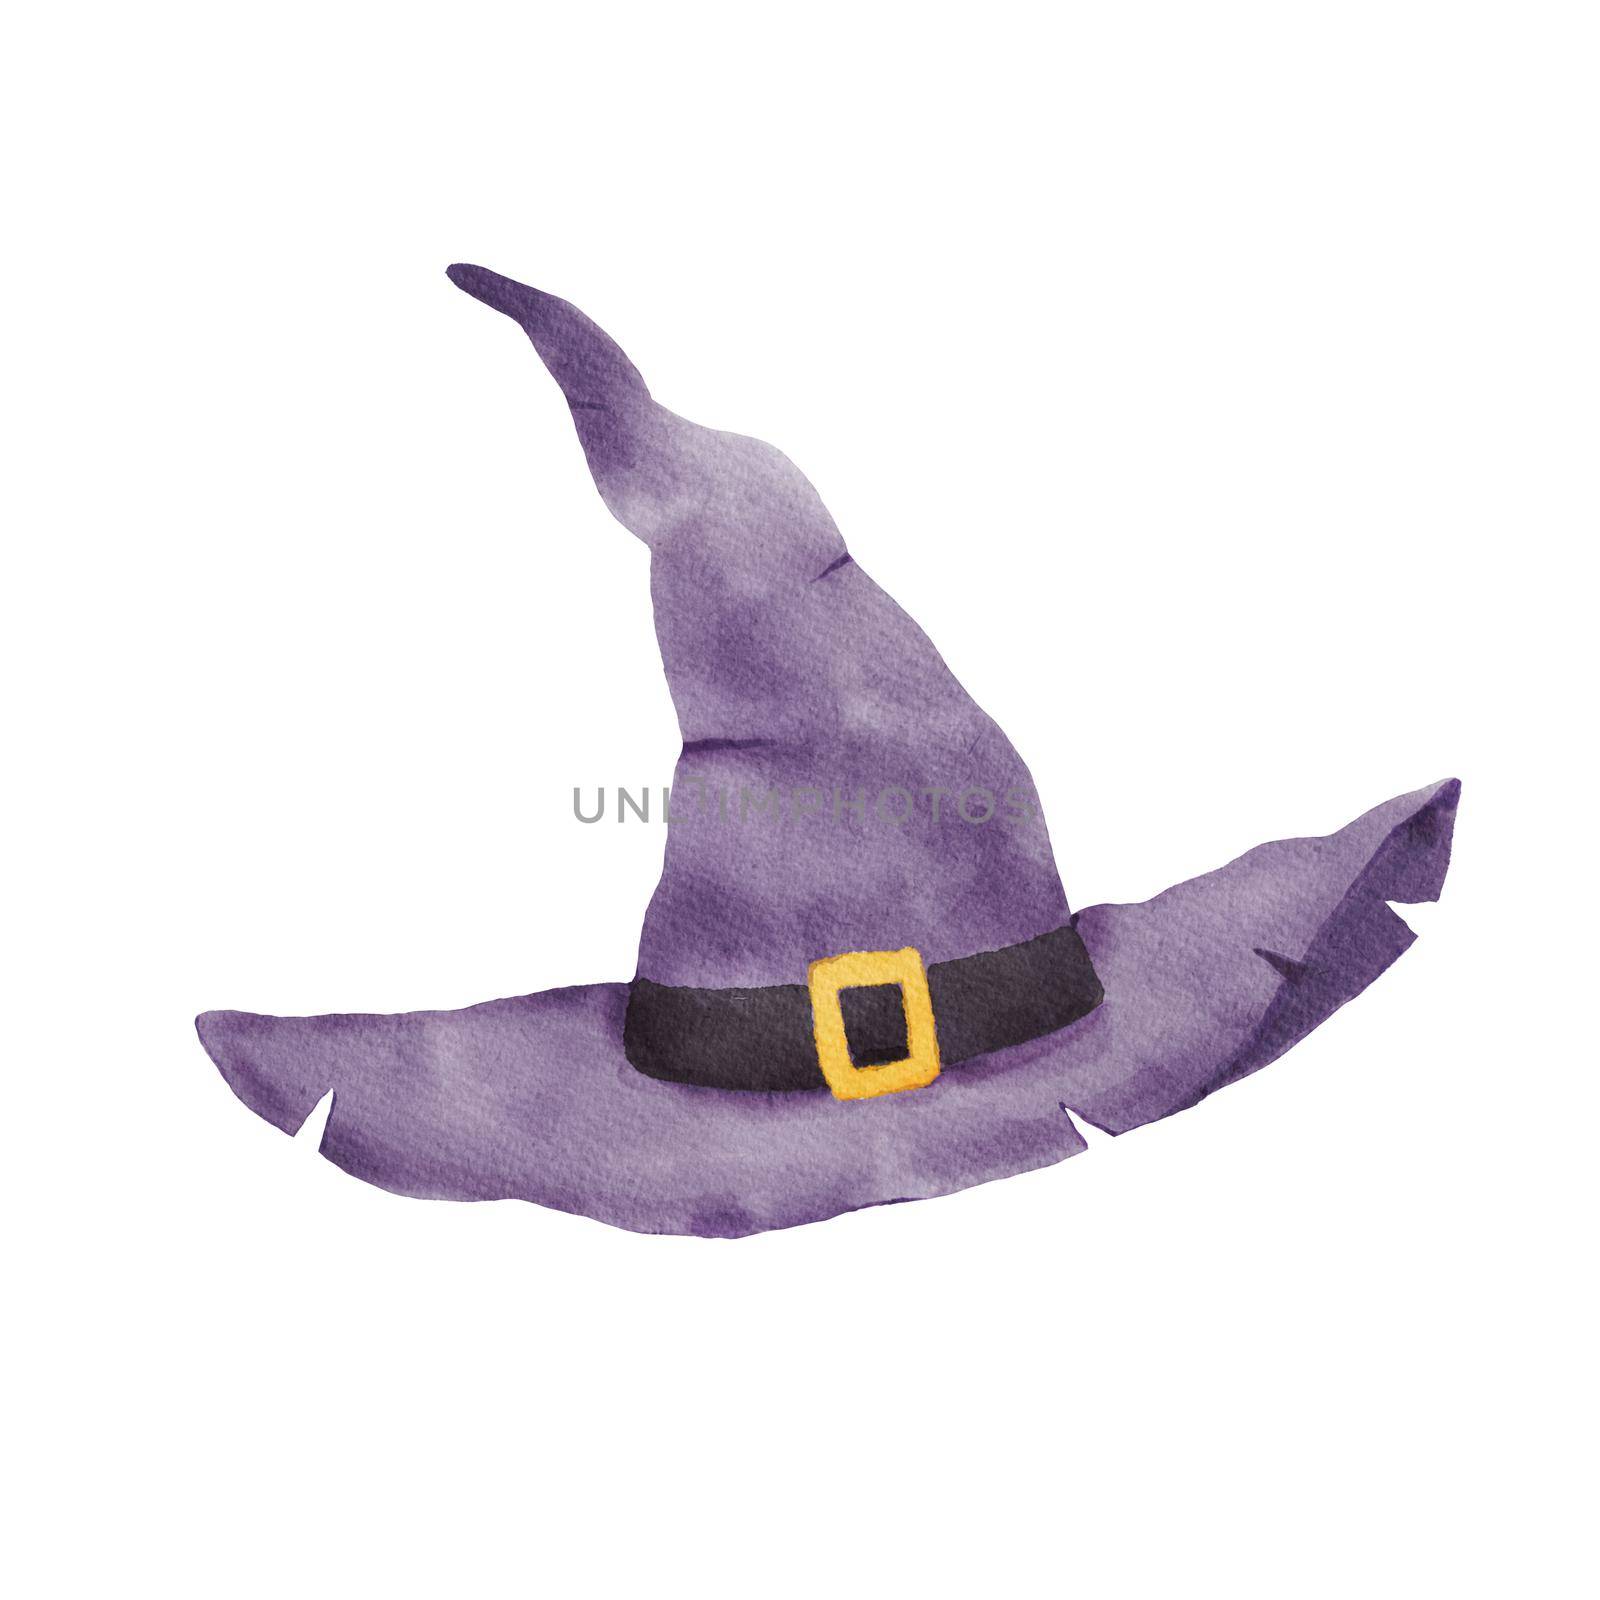 Witch's hat for halloween. Watercolor clipart isolated on white background.